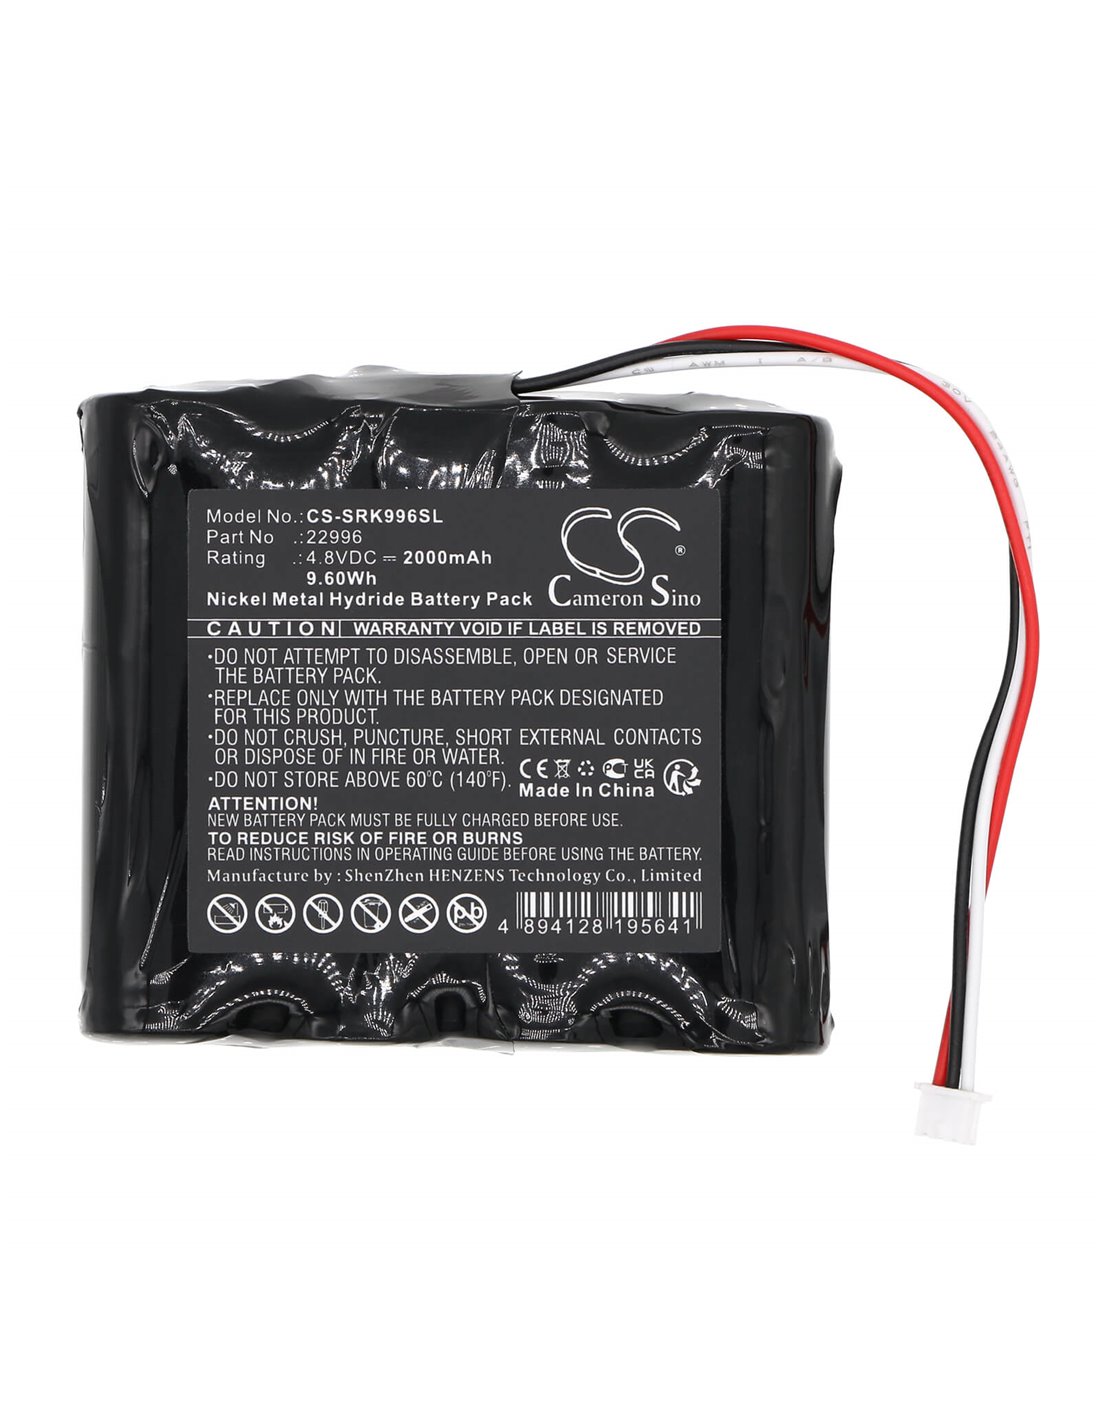 4.8V, Ni-MH, 2000mAh, Battery fits Systronik, 4-hxaal, 9.60Wh